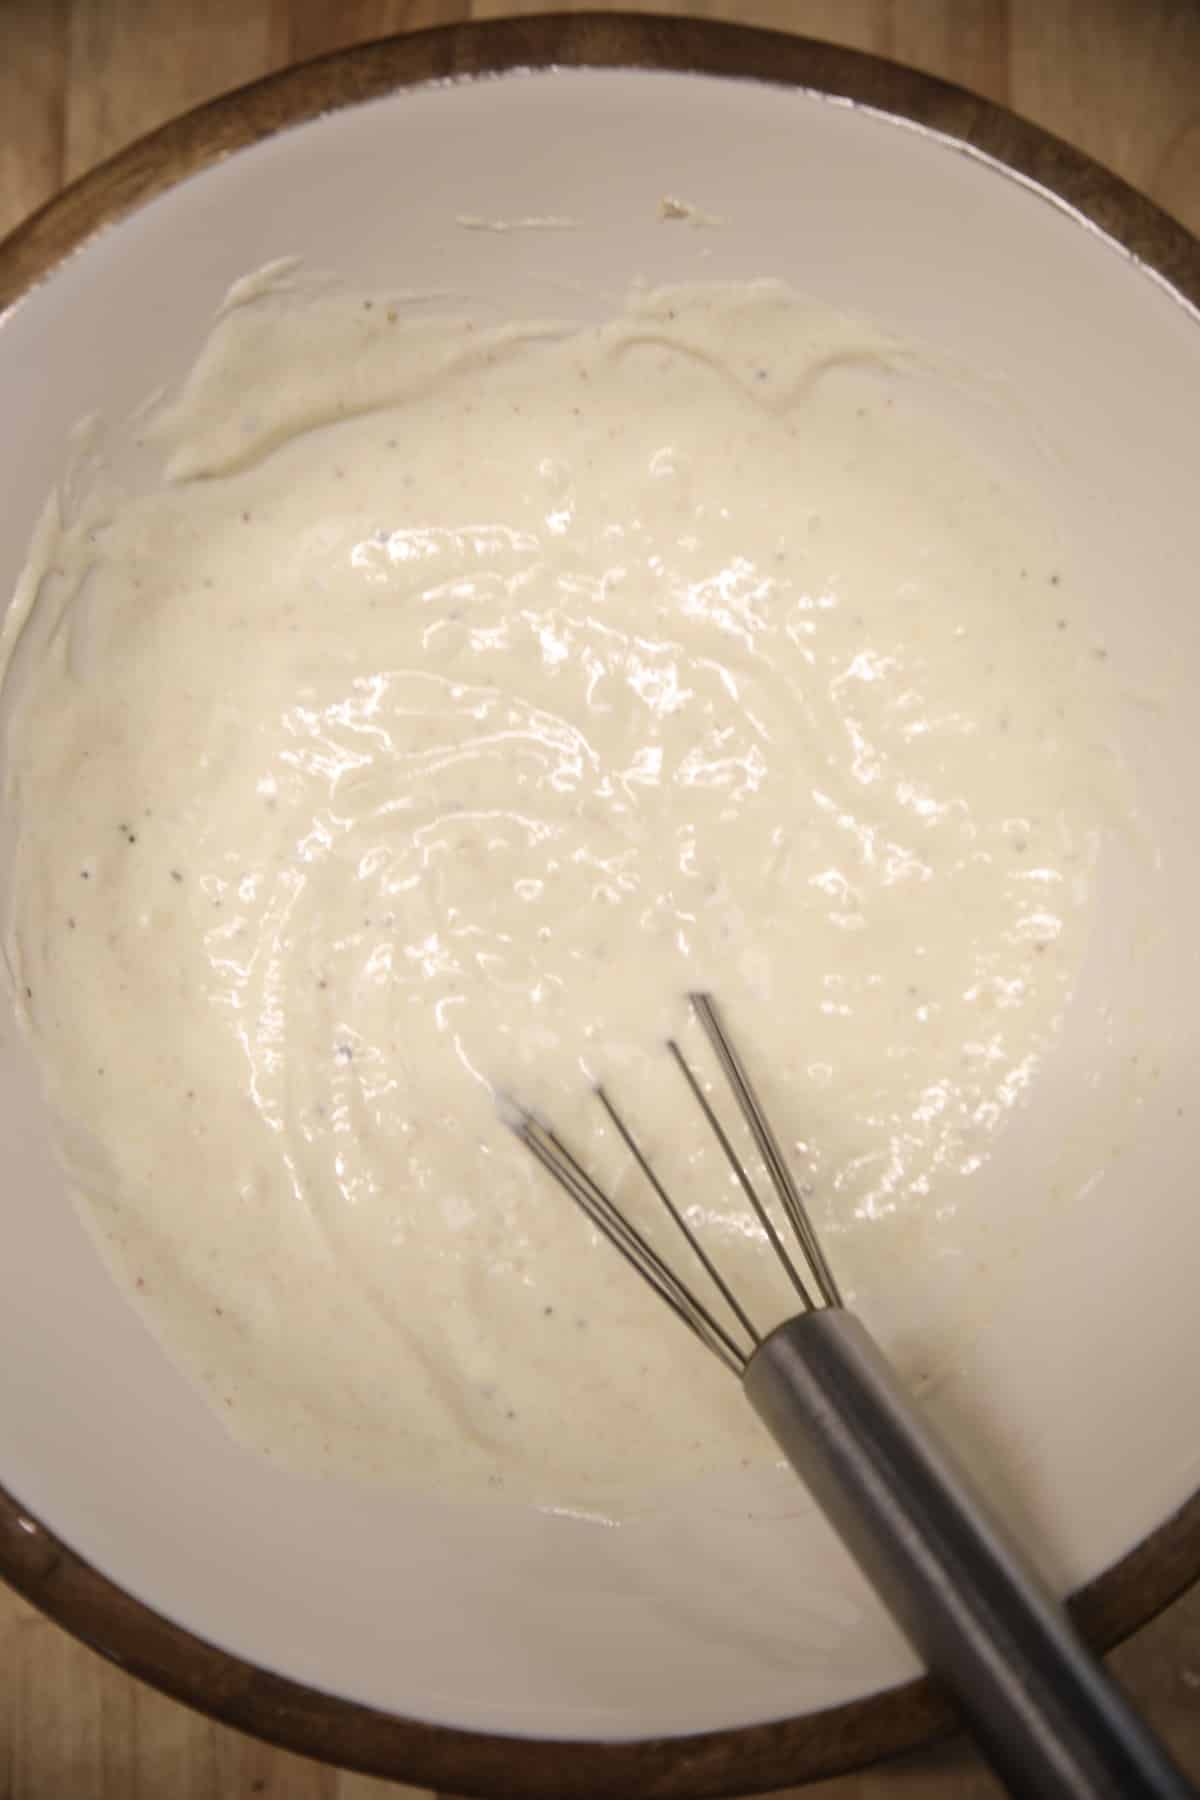 Creamy slaw dressing in a bowl with whisk.